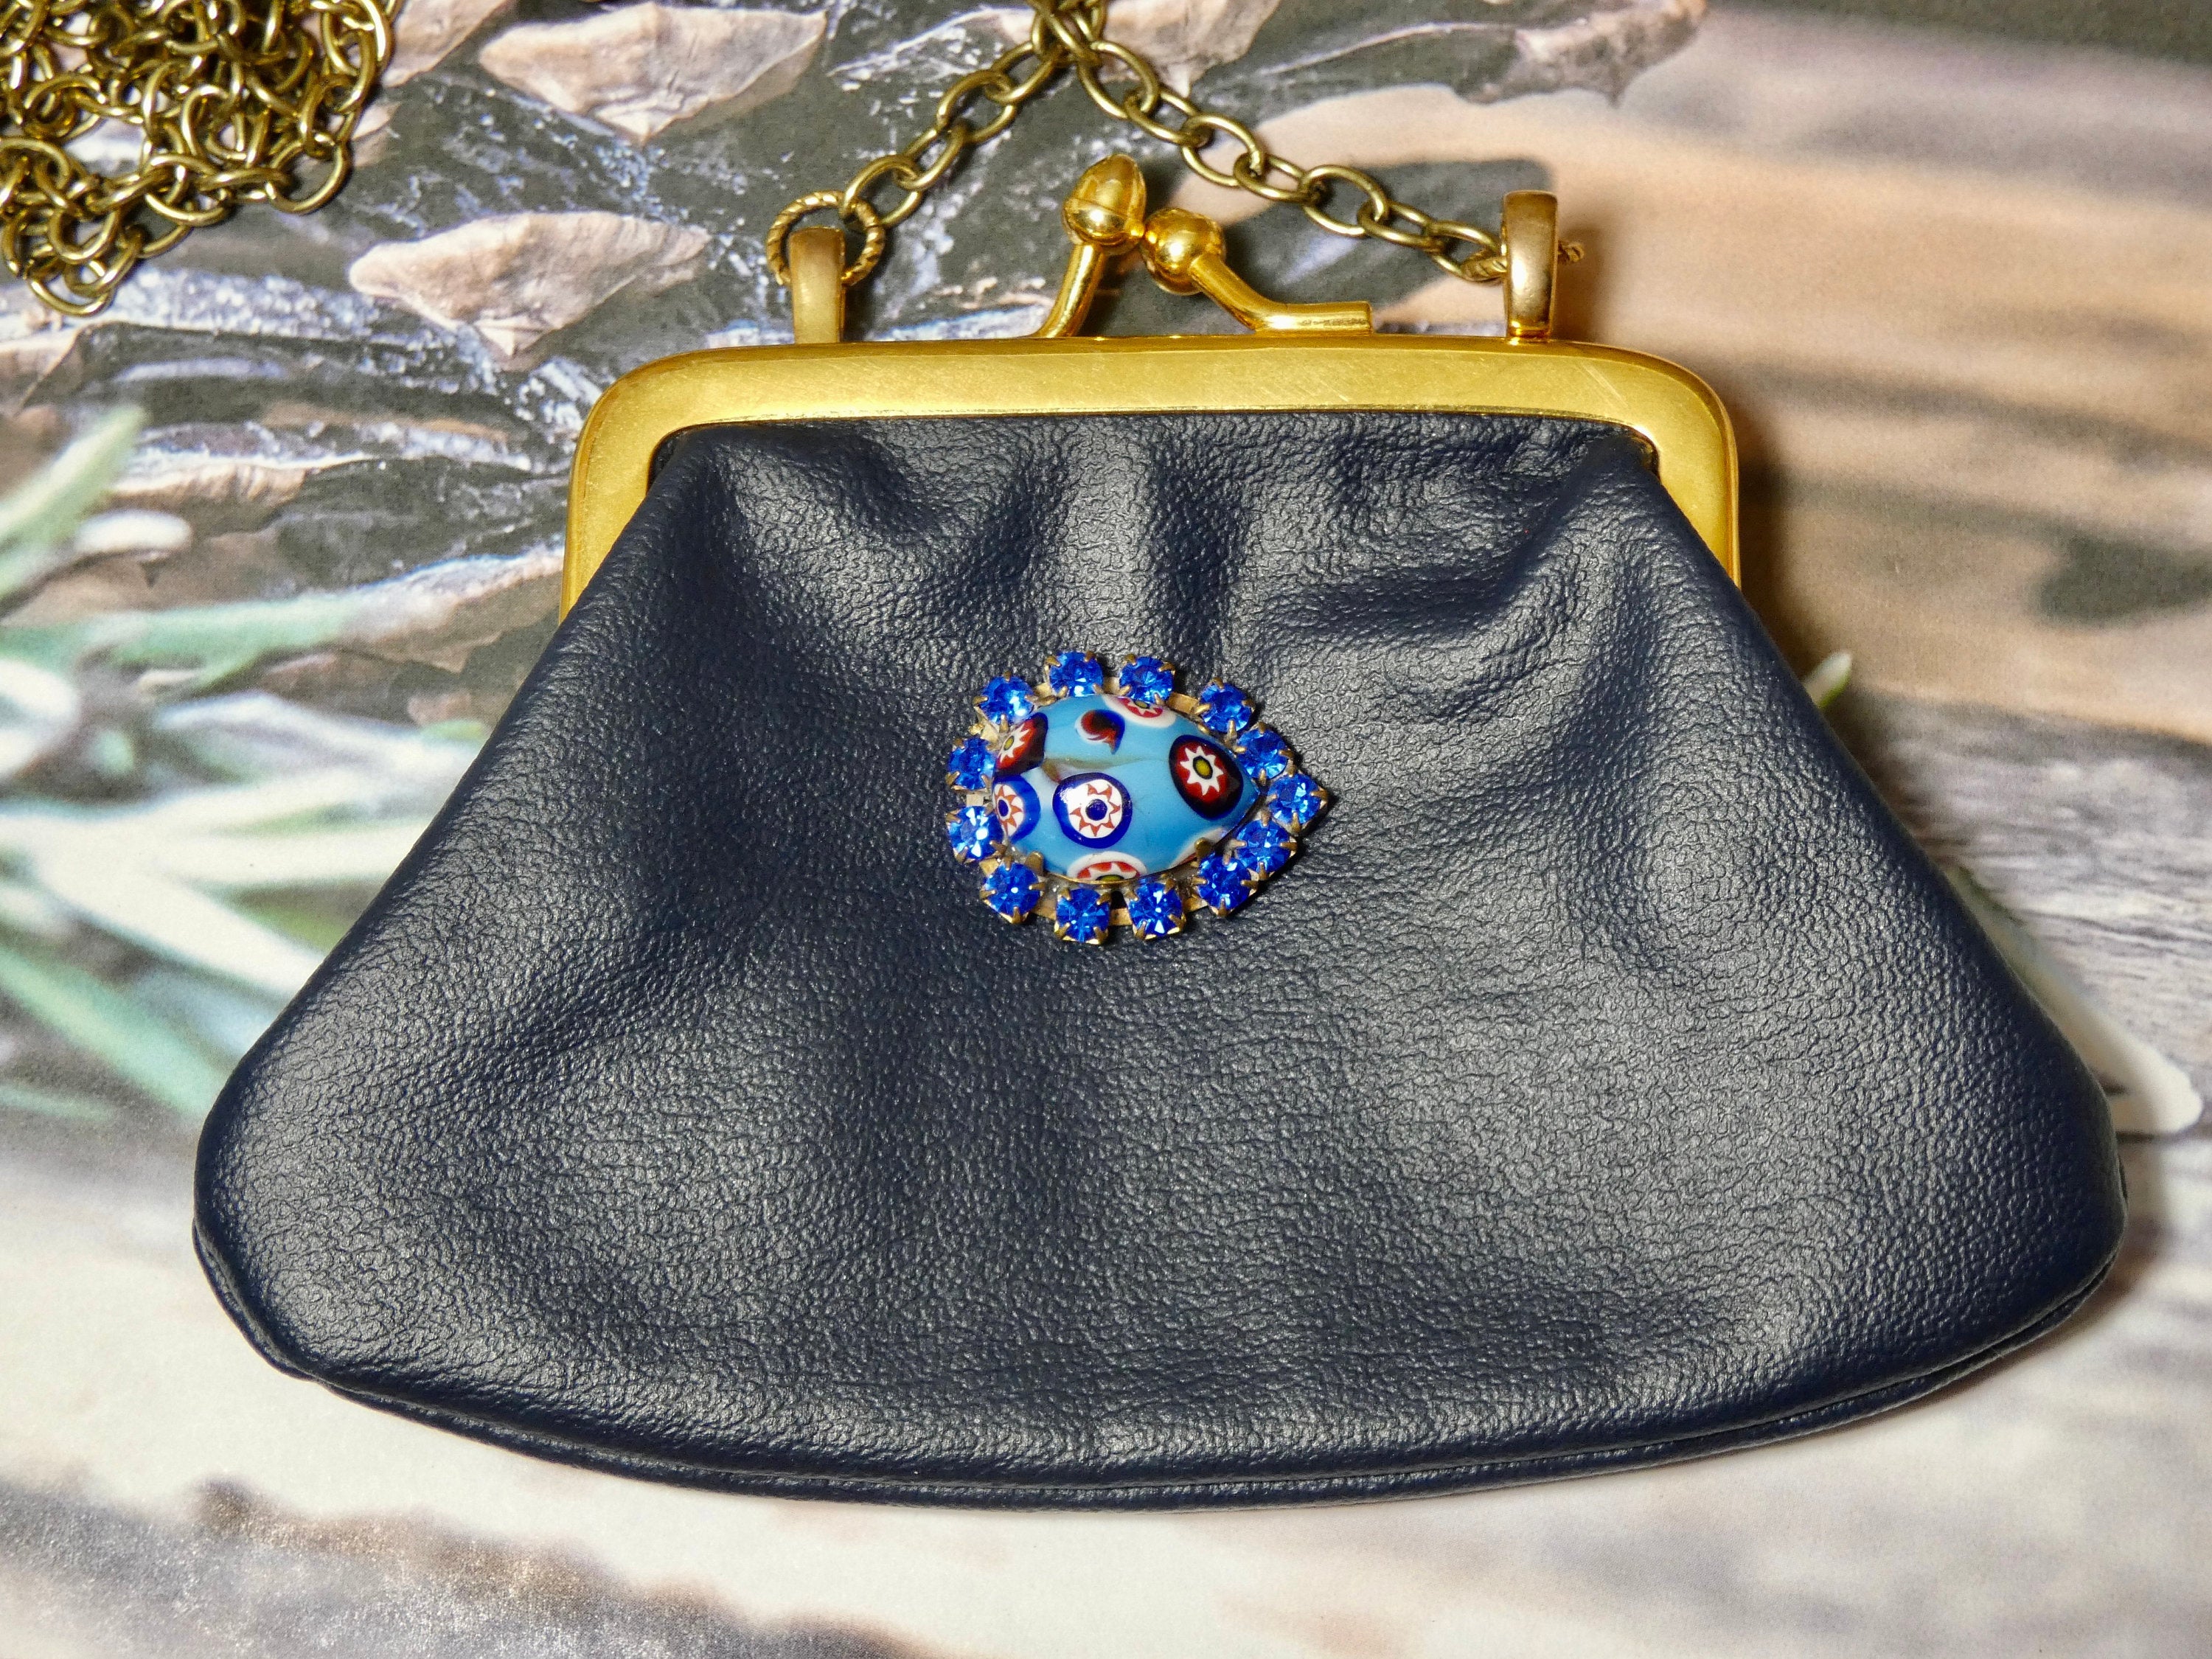 Antique Coin purse hand beaded Kiss lock closure tv movie prop collectible  display Victorian hand mademetal gold closure – Carol's True Vintage and  Antiques